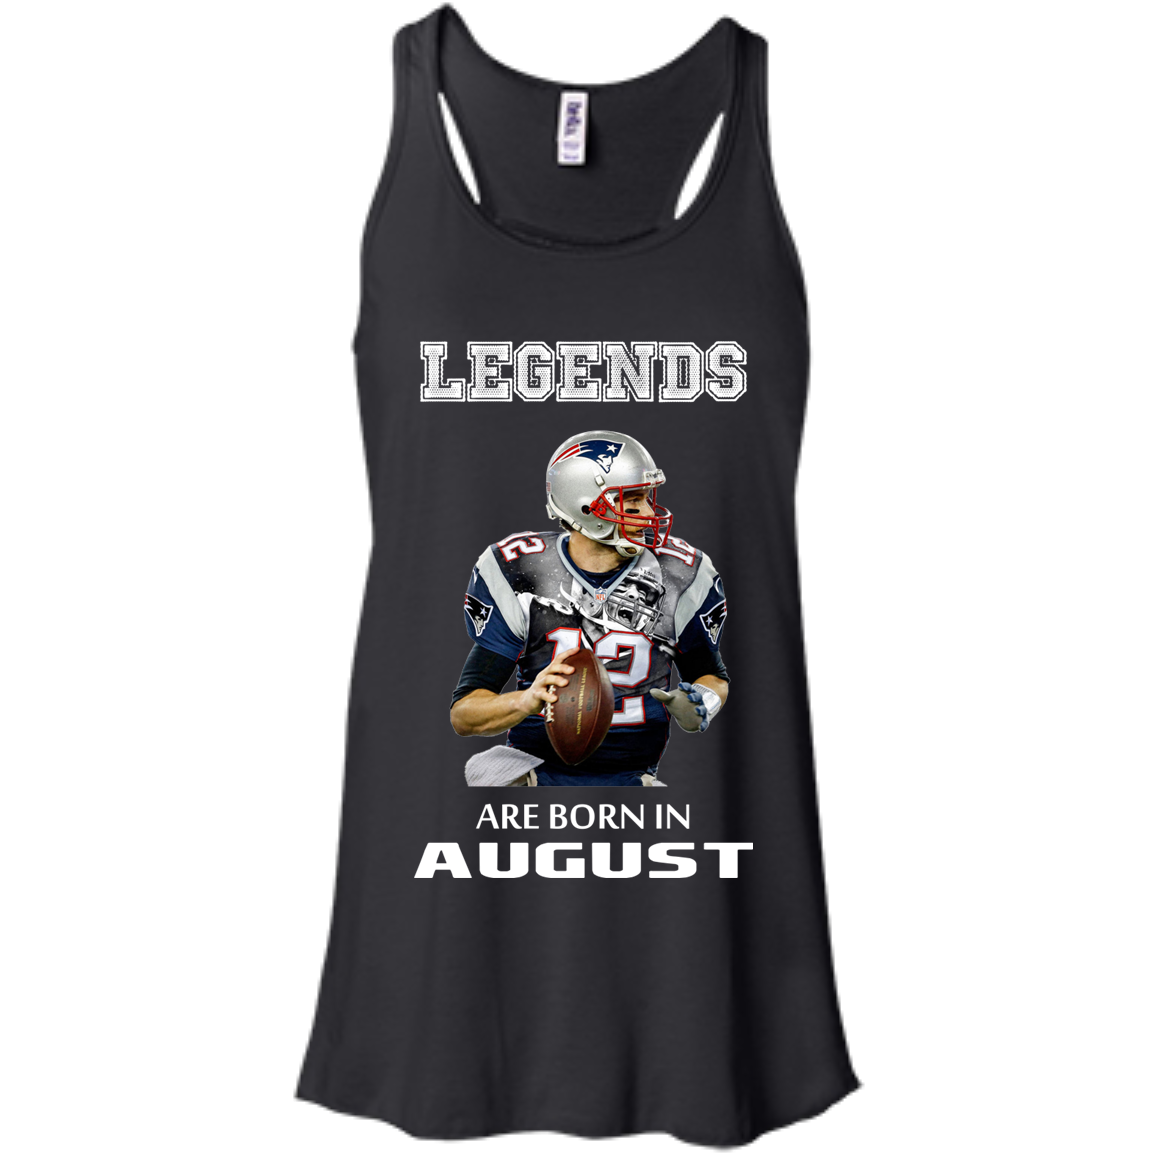 Legends Are Born In August (Tom Brady) T-Shirt - Buy T-Shirts ...